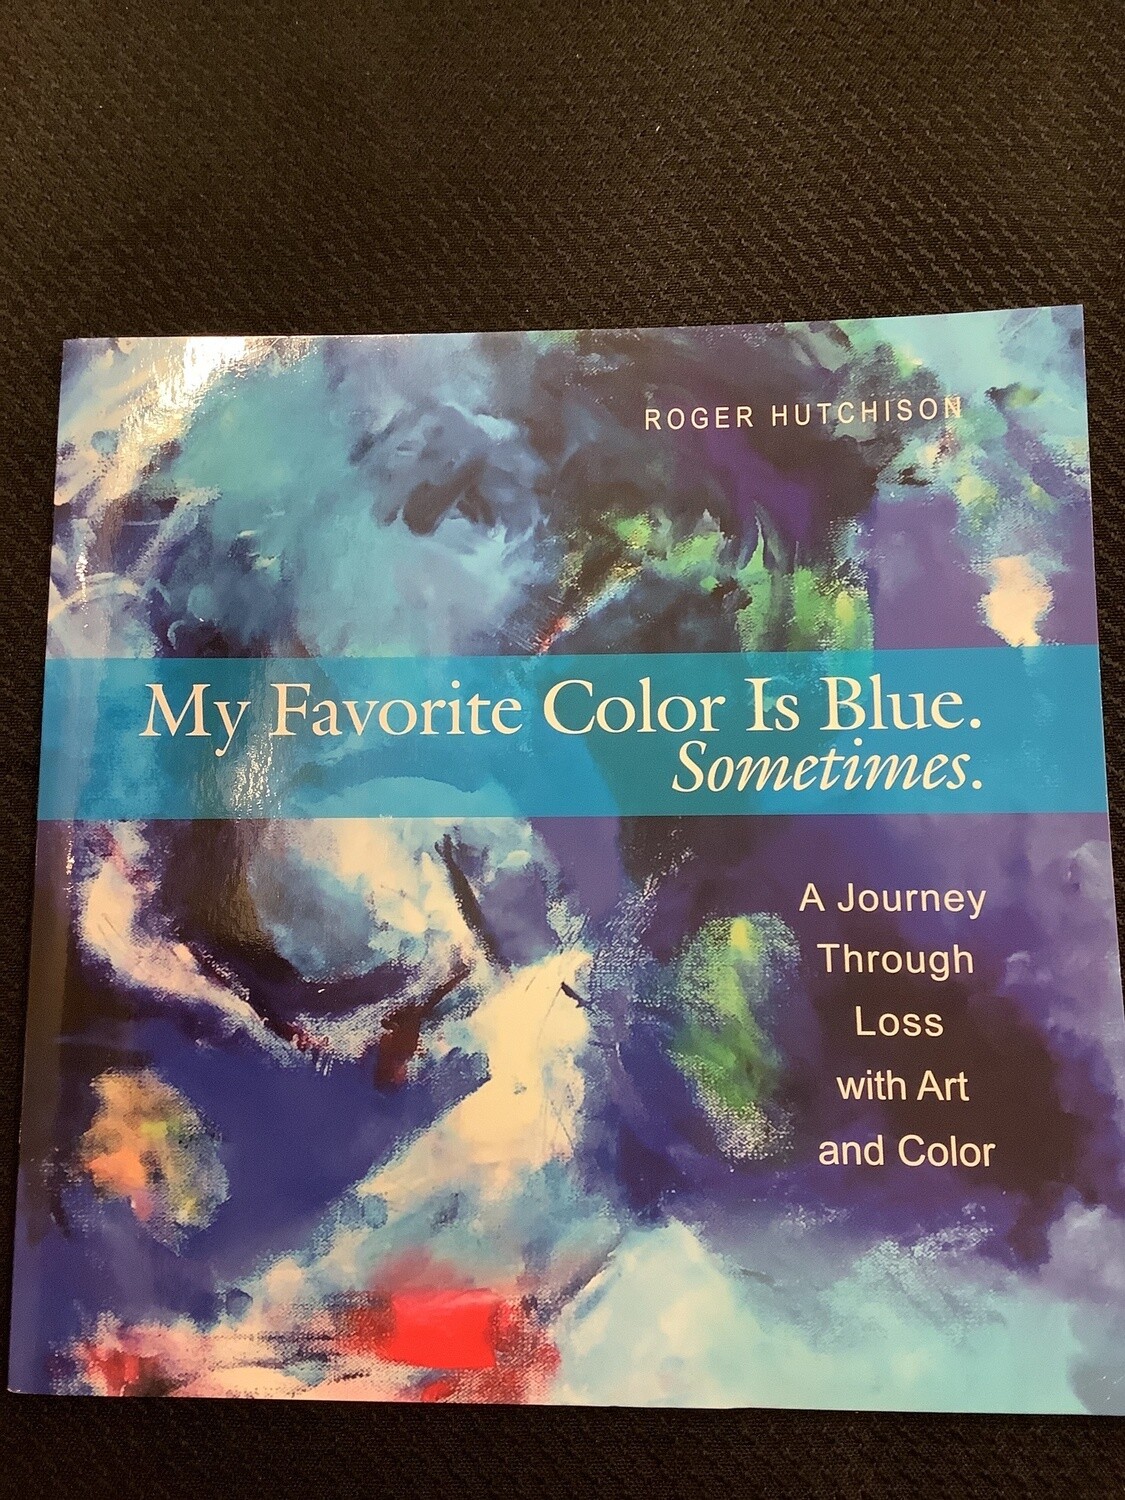 My Favorite Color Is Blue Sometimes. A Journey Through Loss with Art and Color - Roger Hutchison